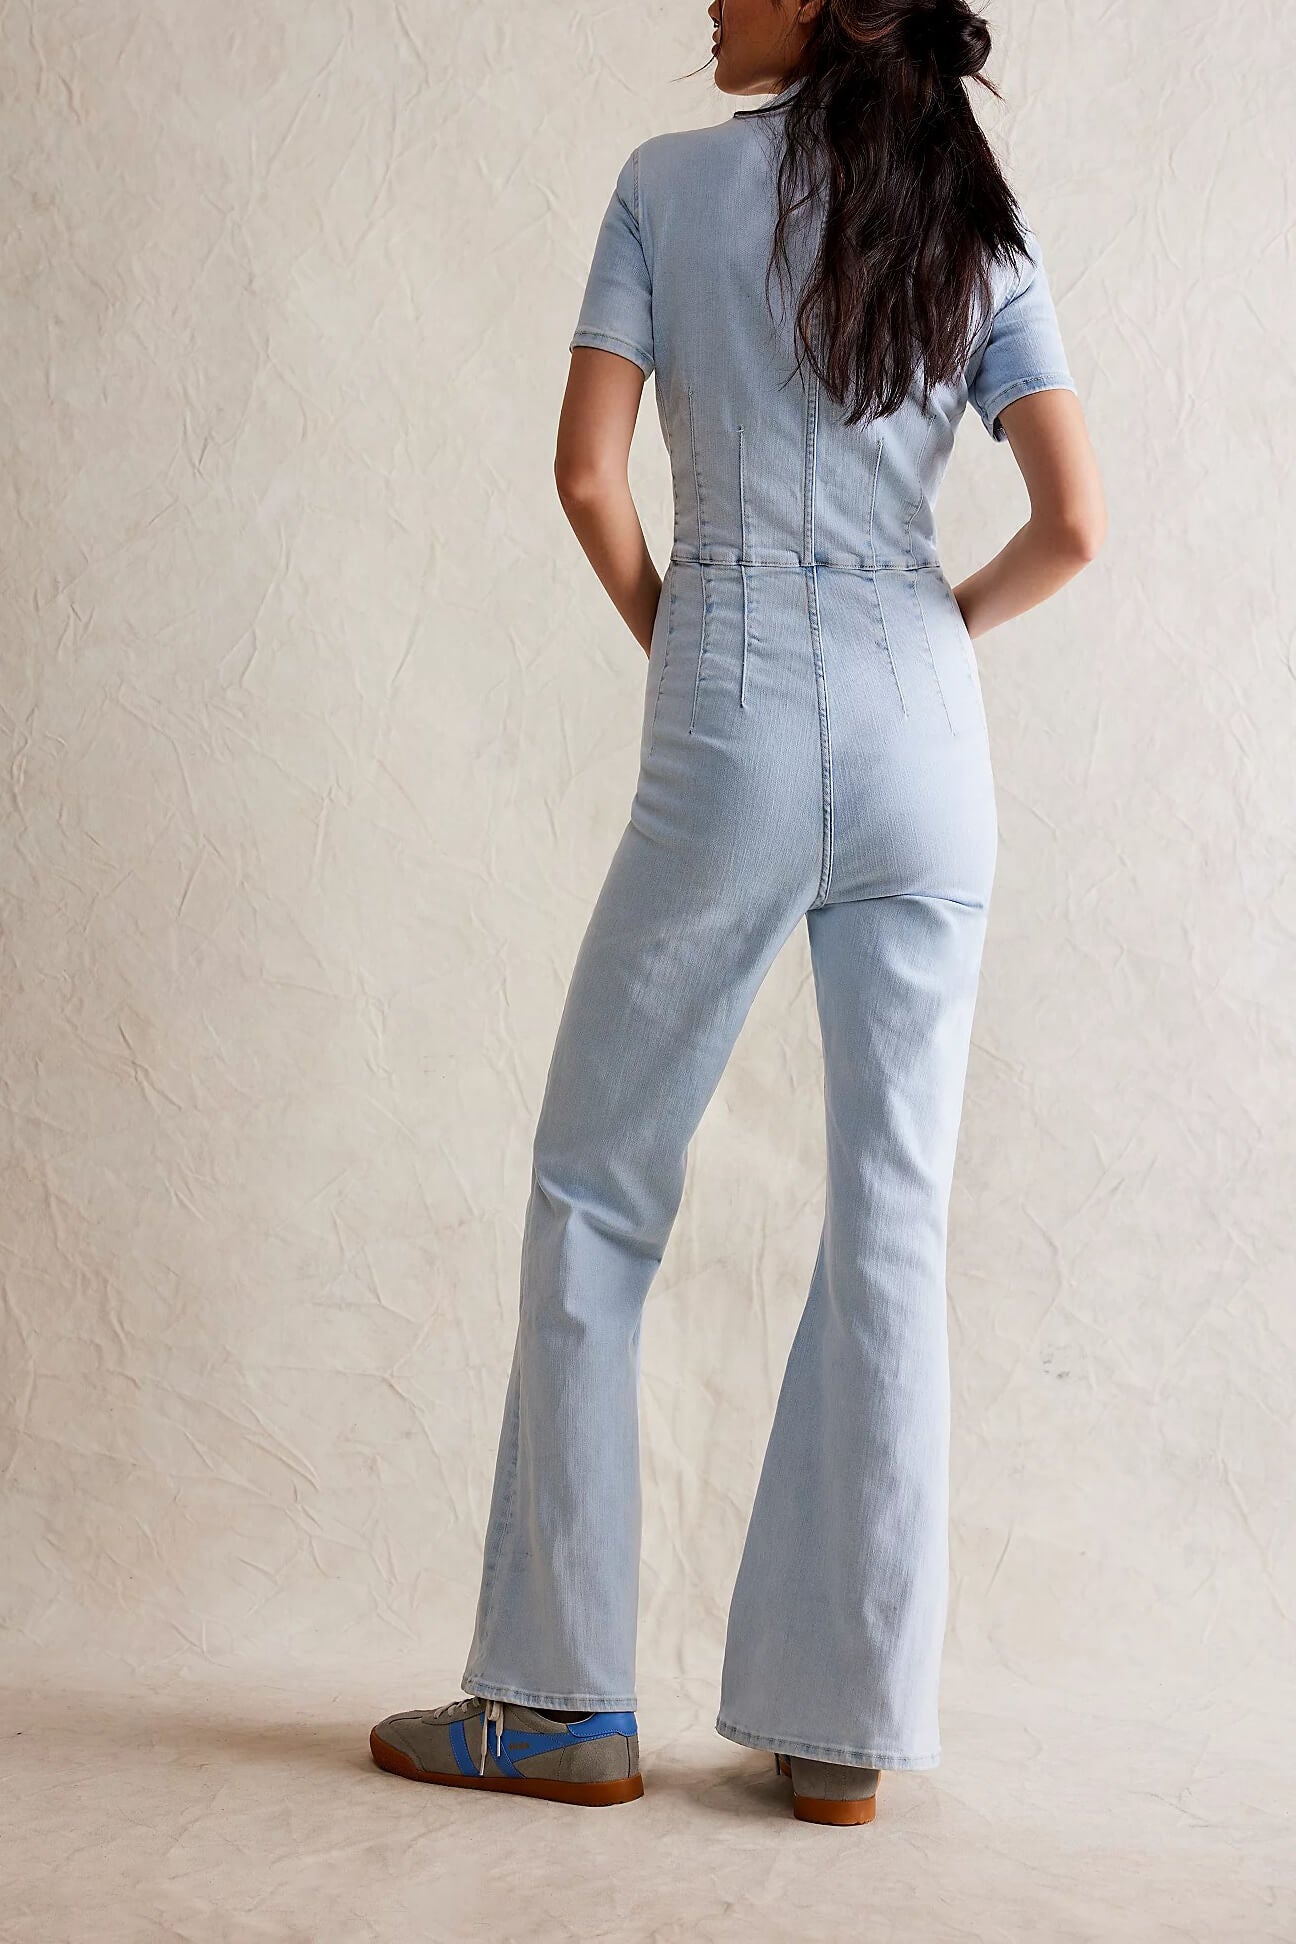 Free People Jayde flare jumpsuit in whimsy